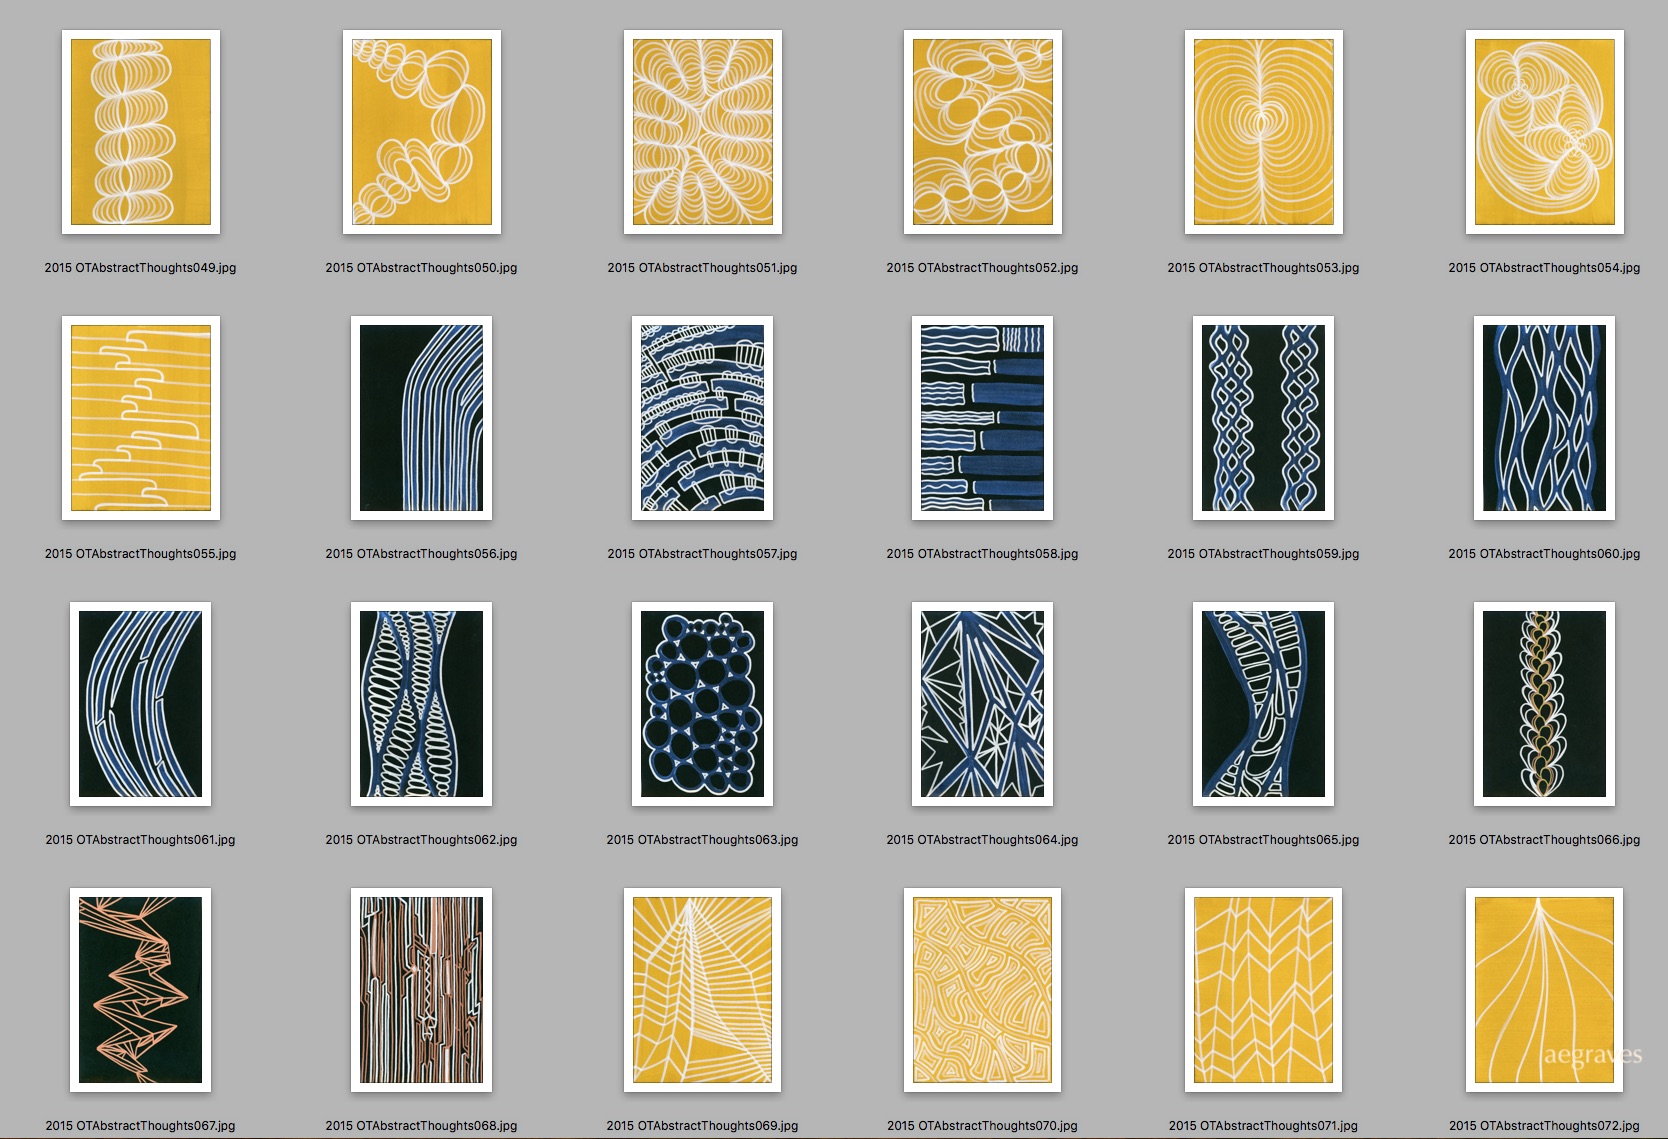 screenshot of acrylic ink drawings by A.E. Graves